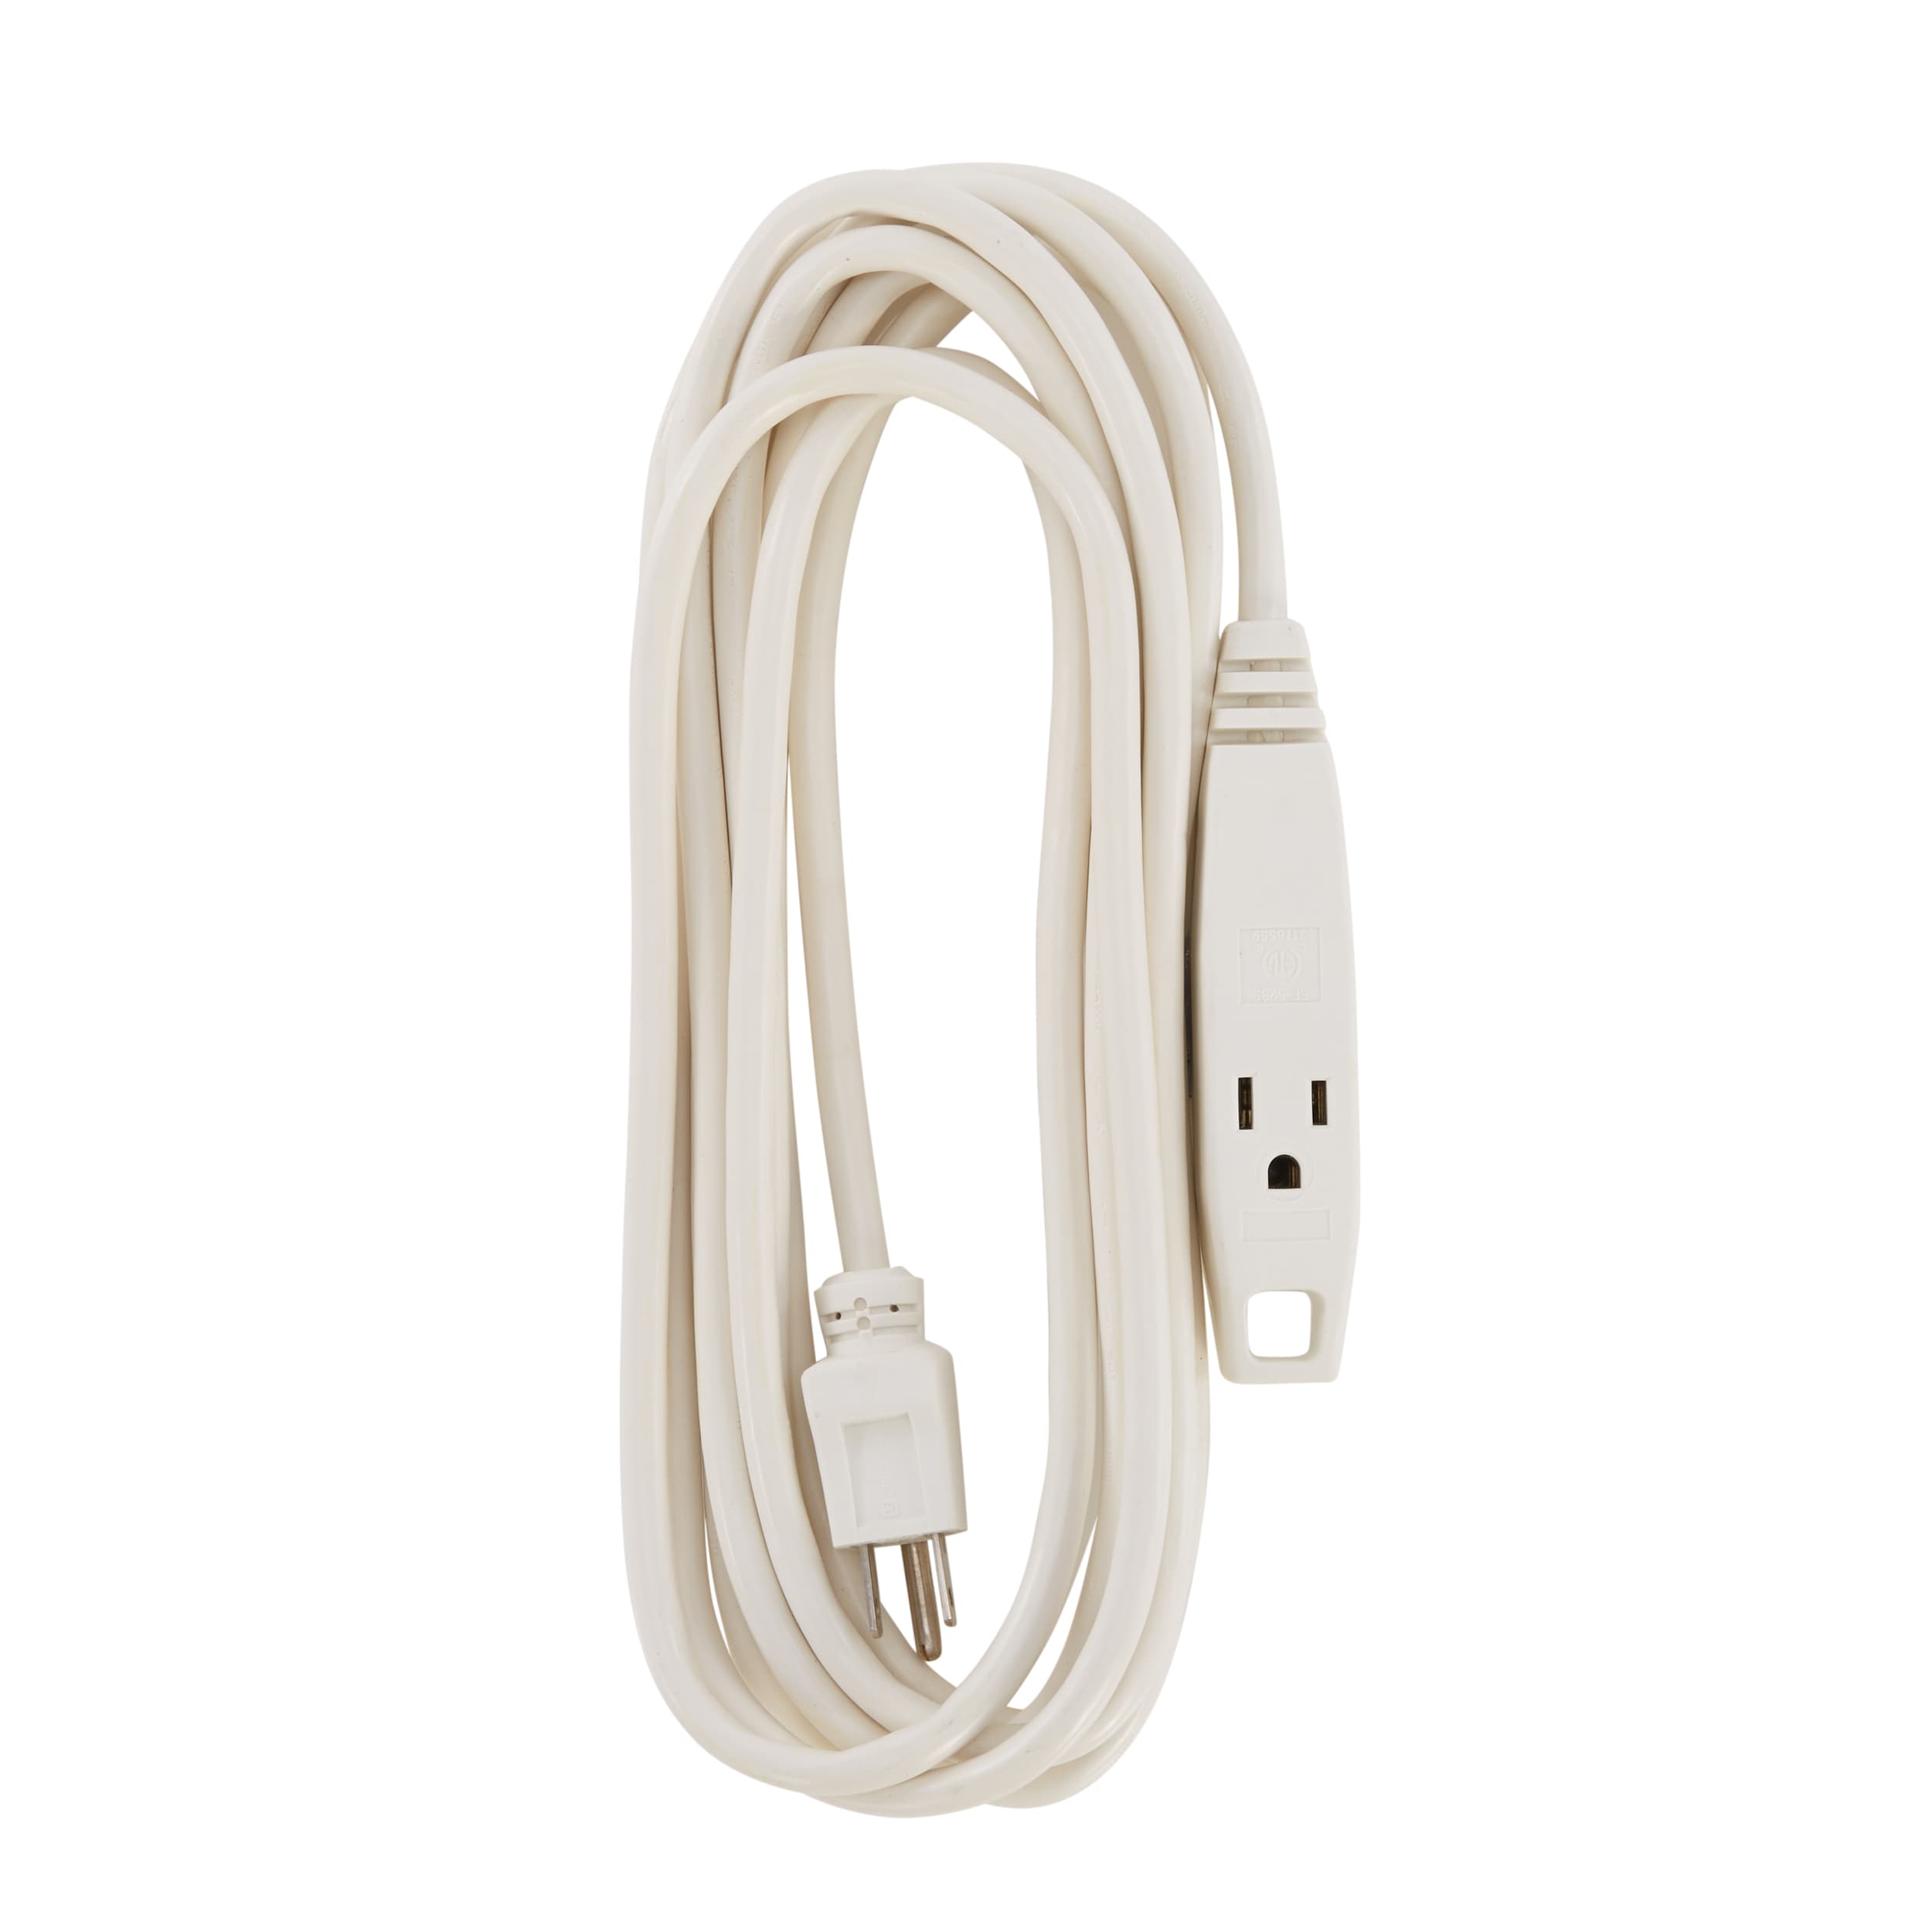 Indoor Extension Cords at